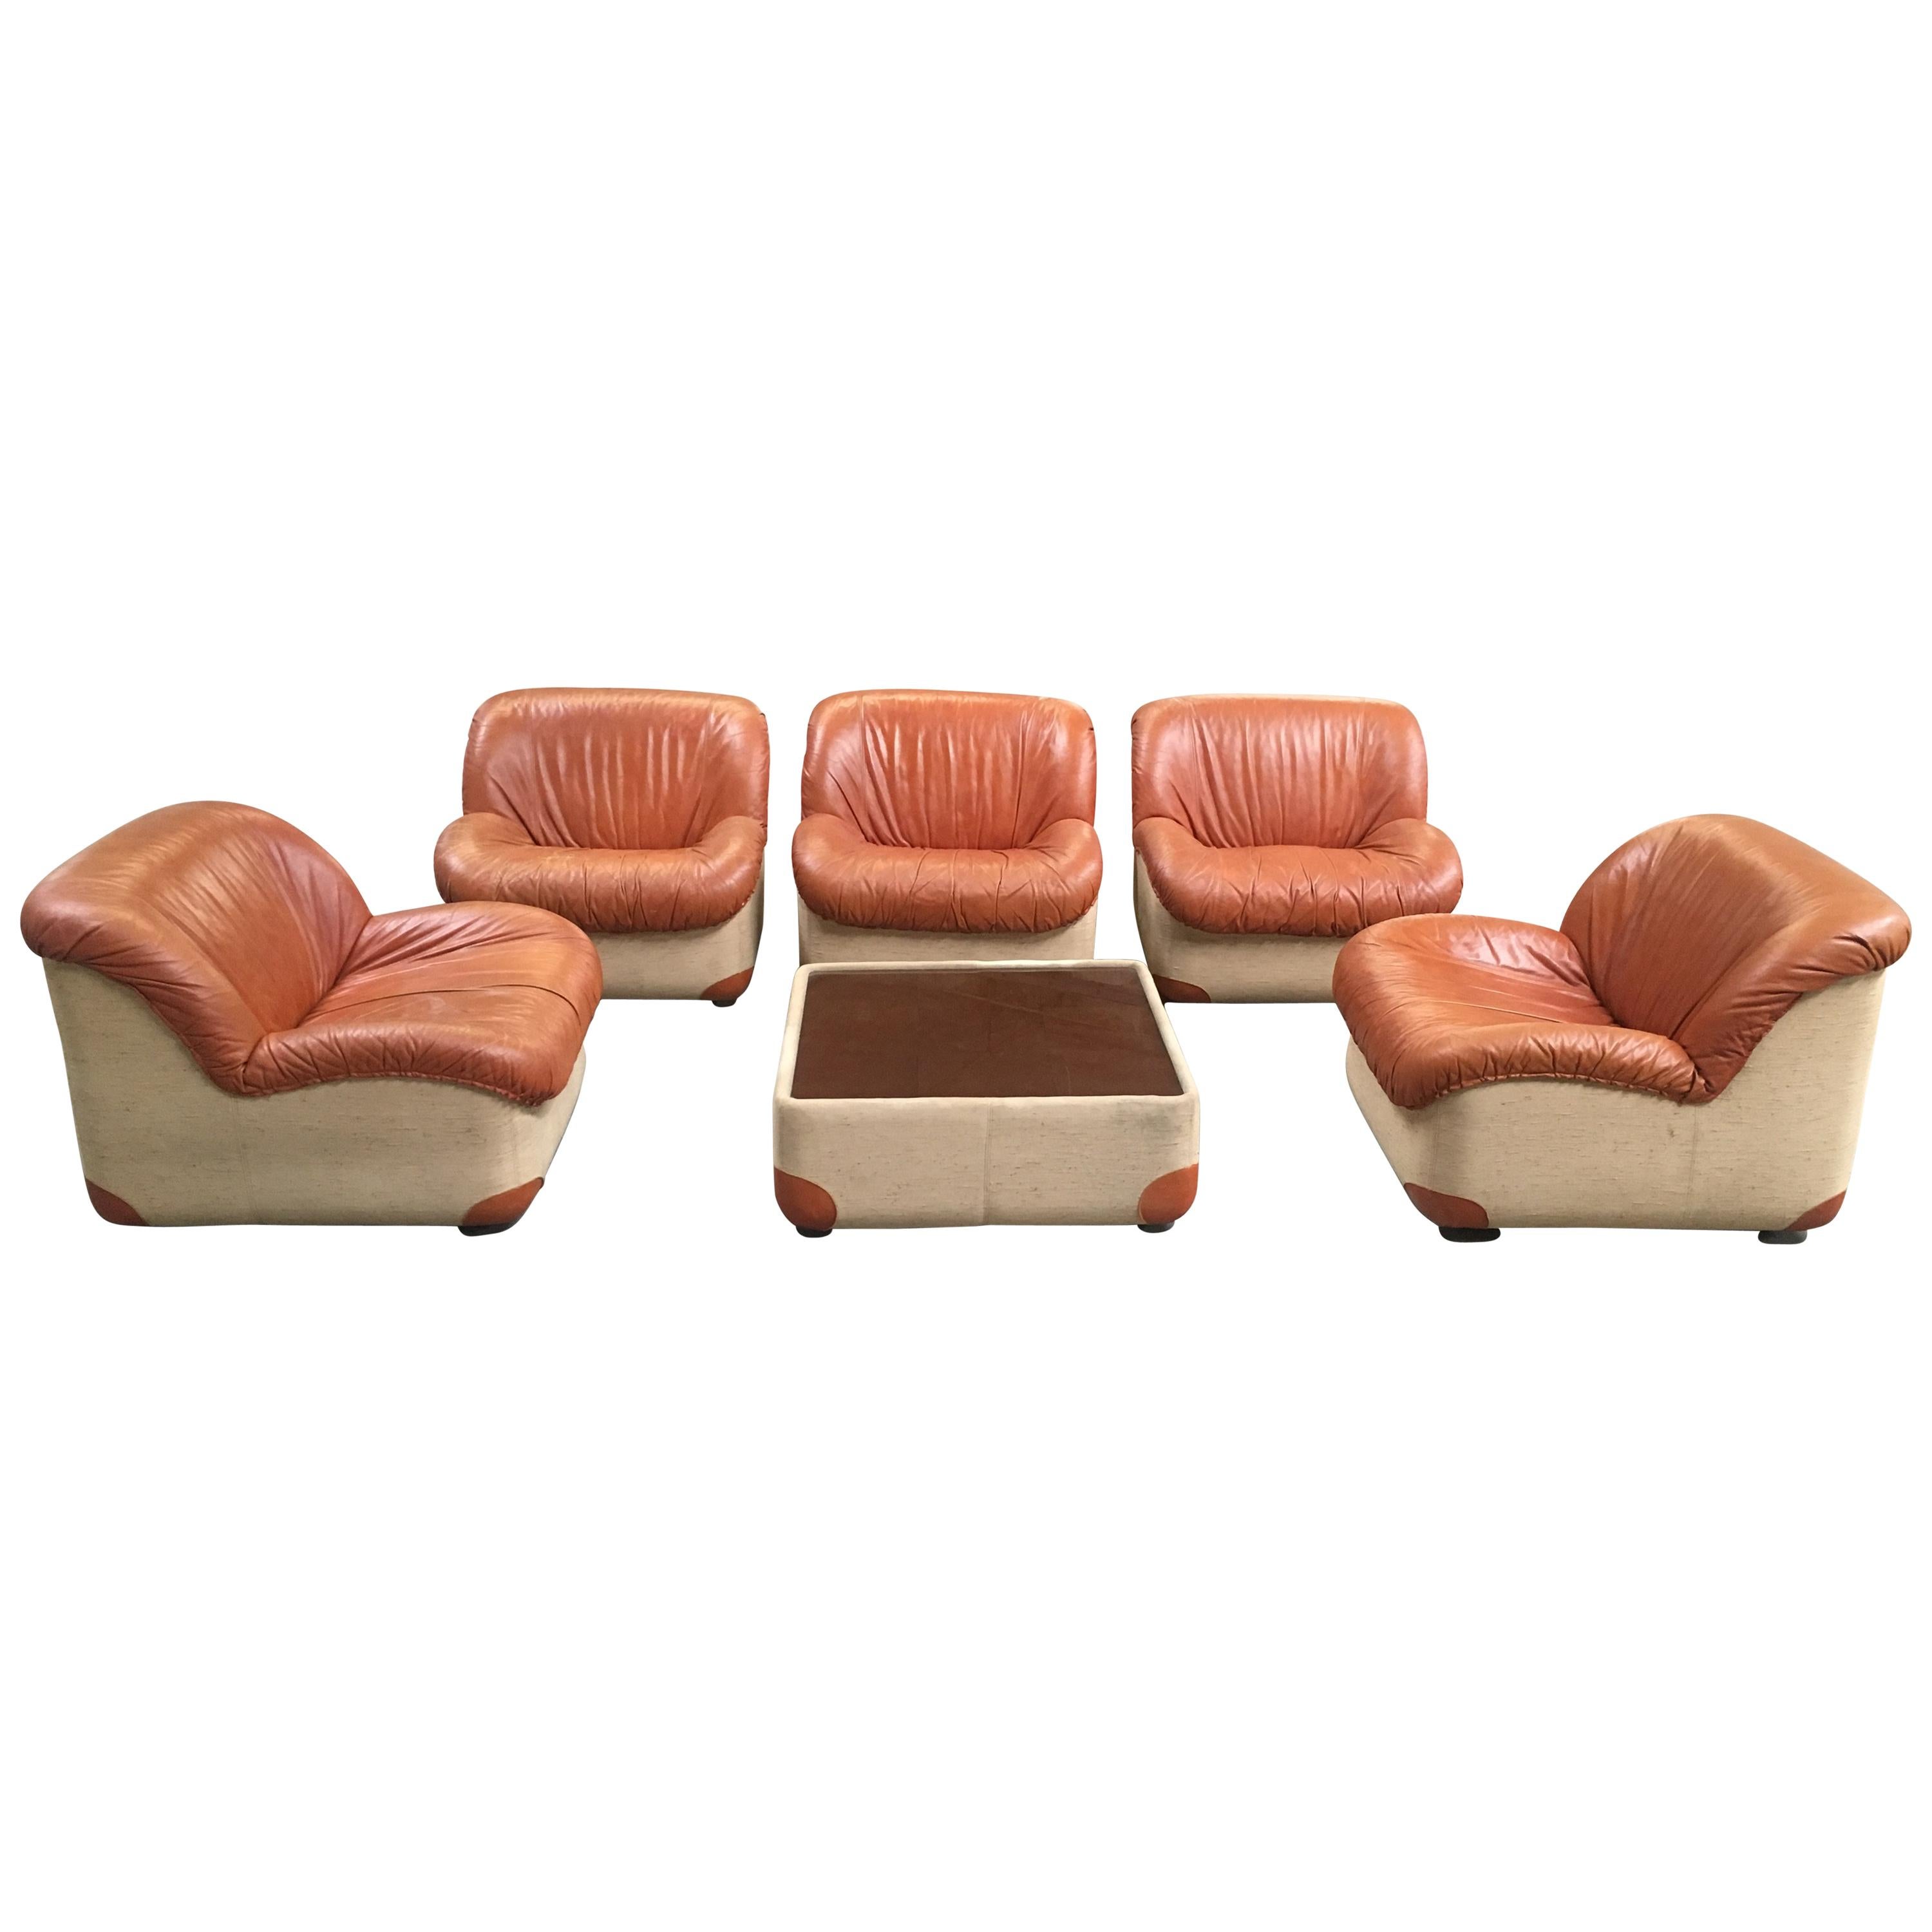 Mid-Century Modern Italian Canvas and Leather Living Room Set from 1970s